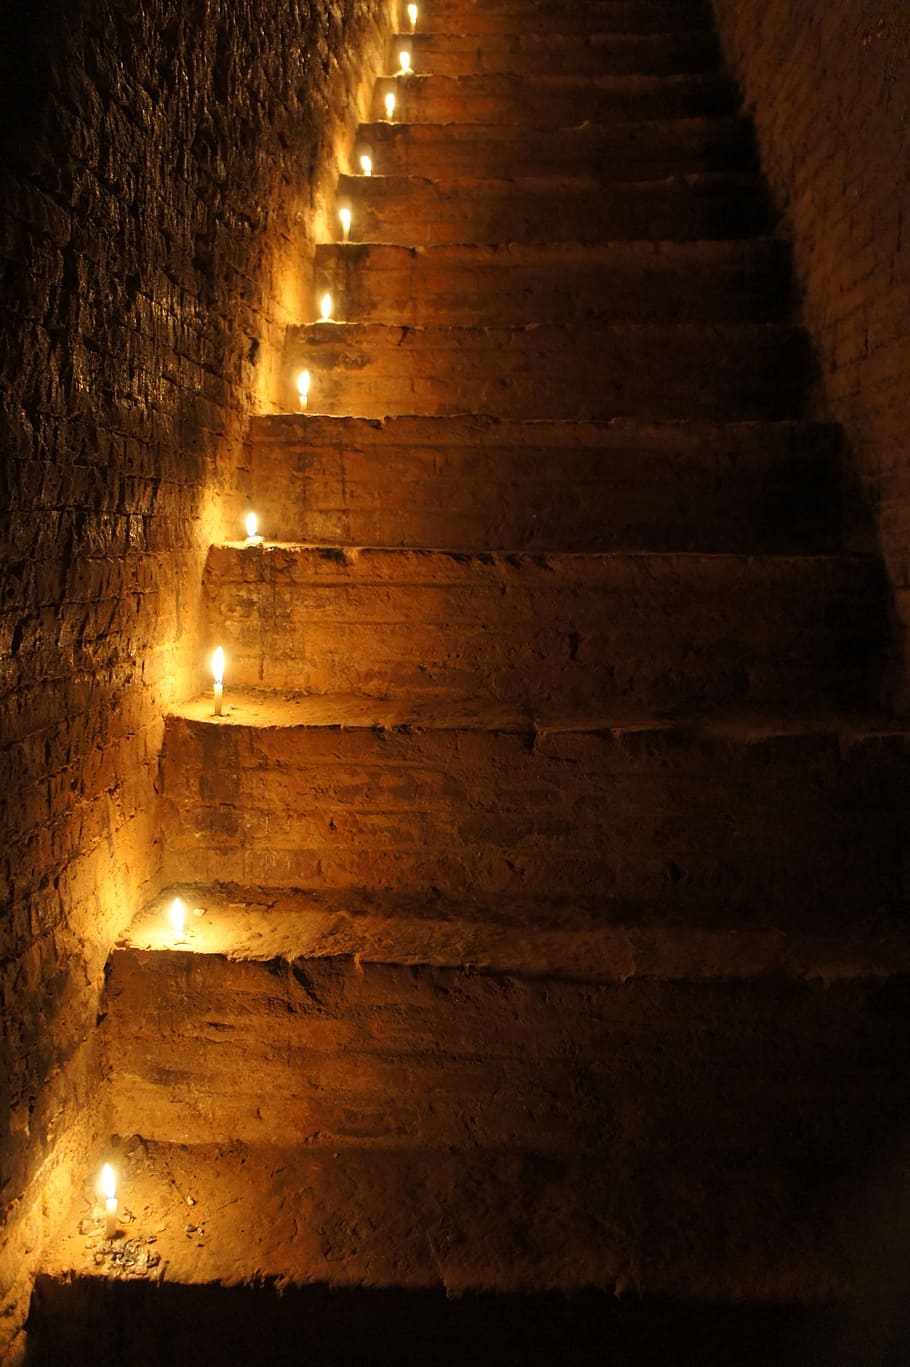 Rise, Stairs, Staircase, Stone, Stairway, stone stairway, go up, candles, steps, architecture